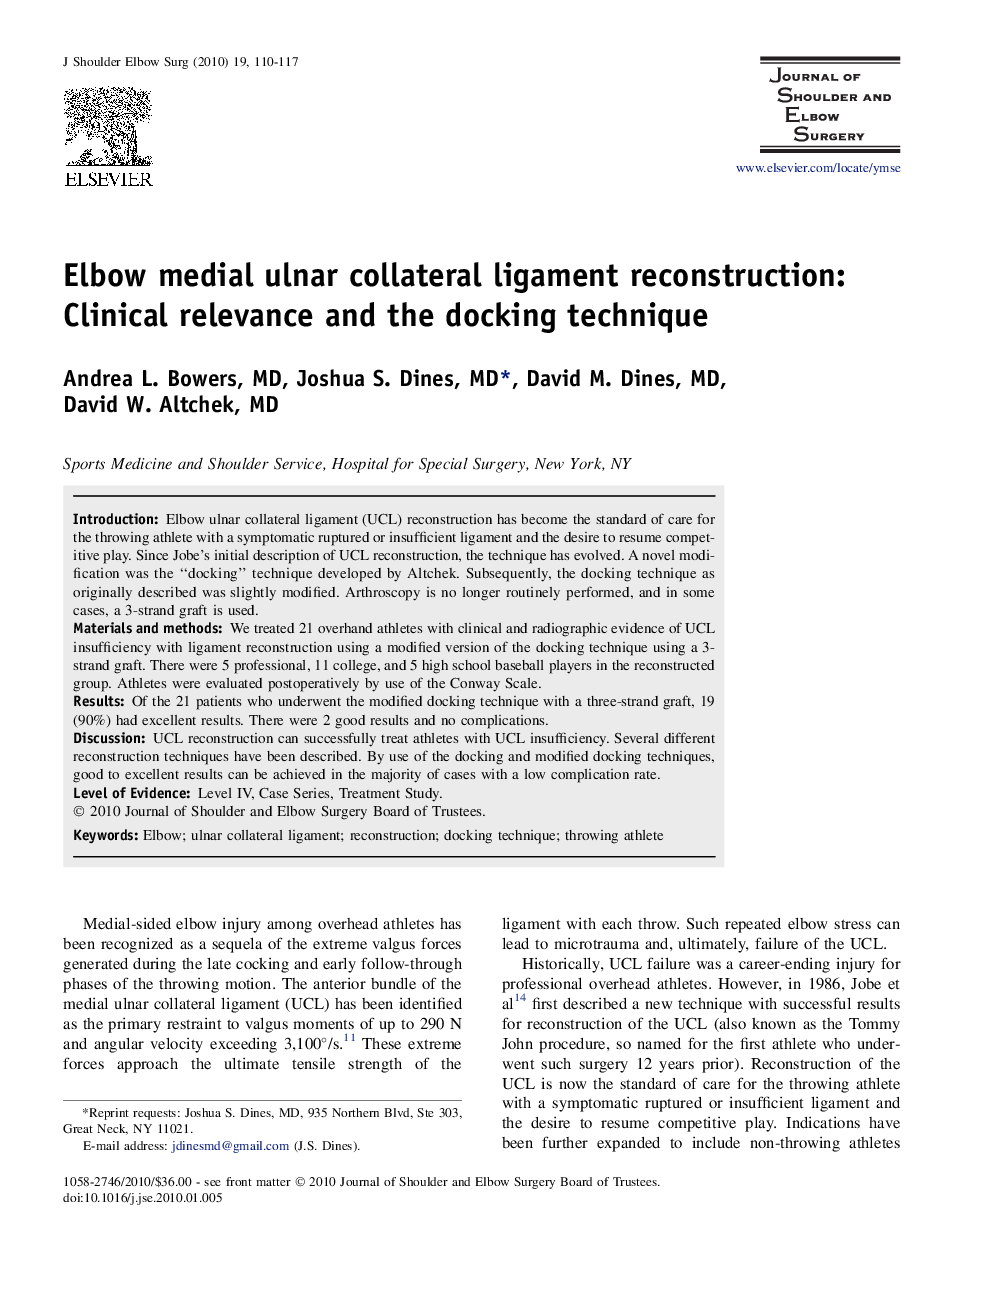 Elbow medial ulnar collateral ligament reconstruction: Clinical relevance and the docking technique